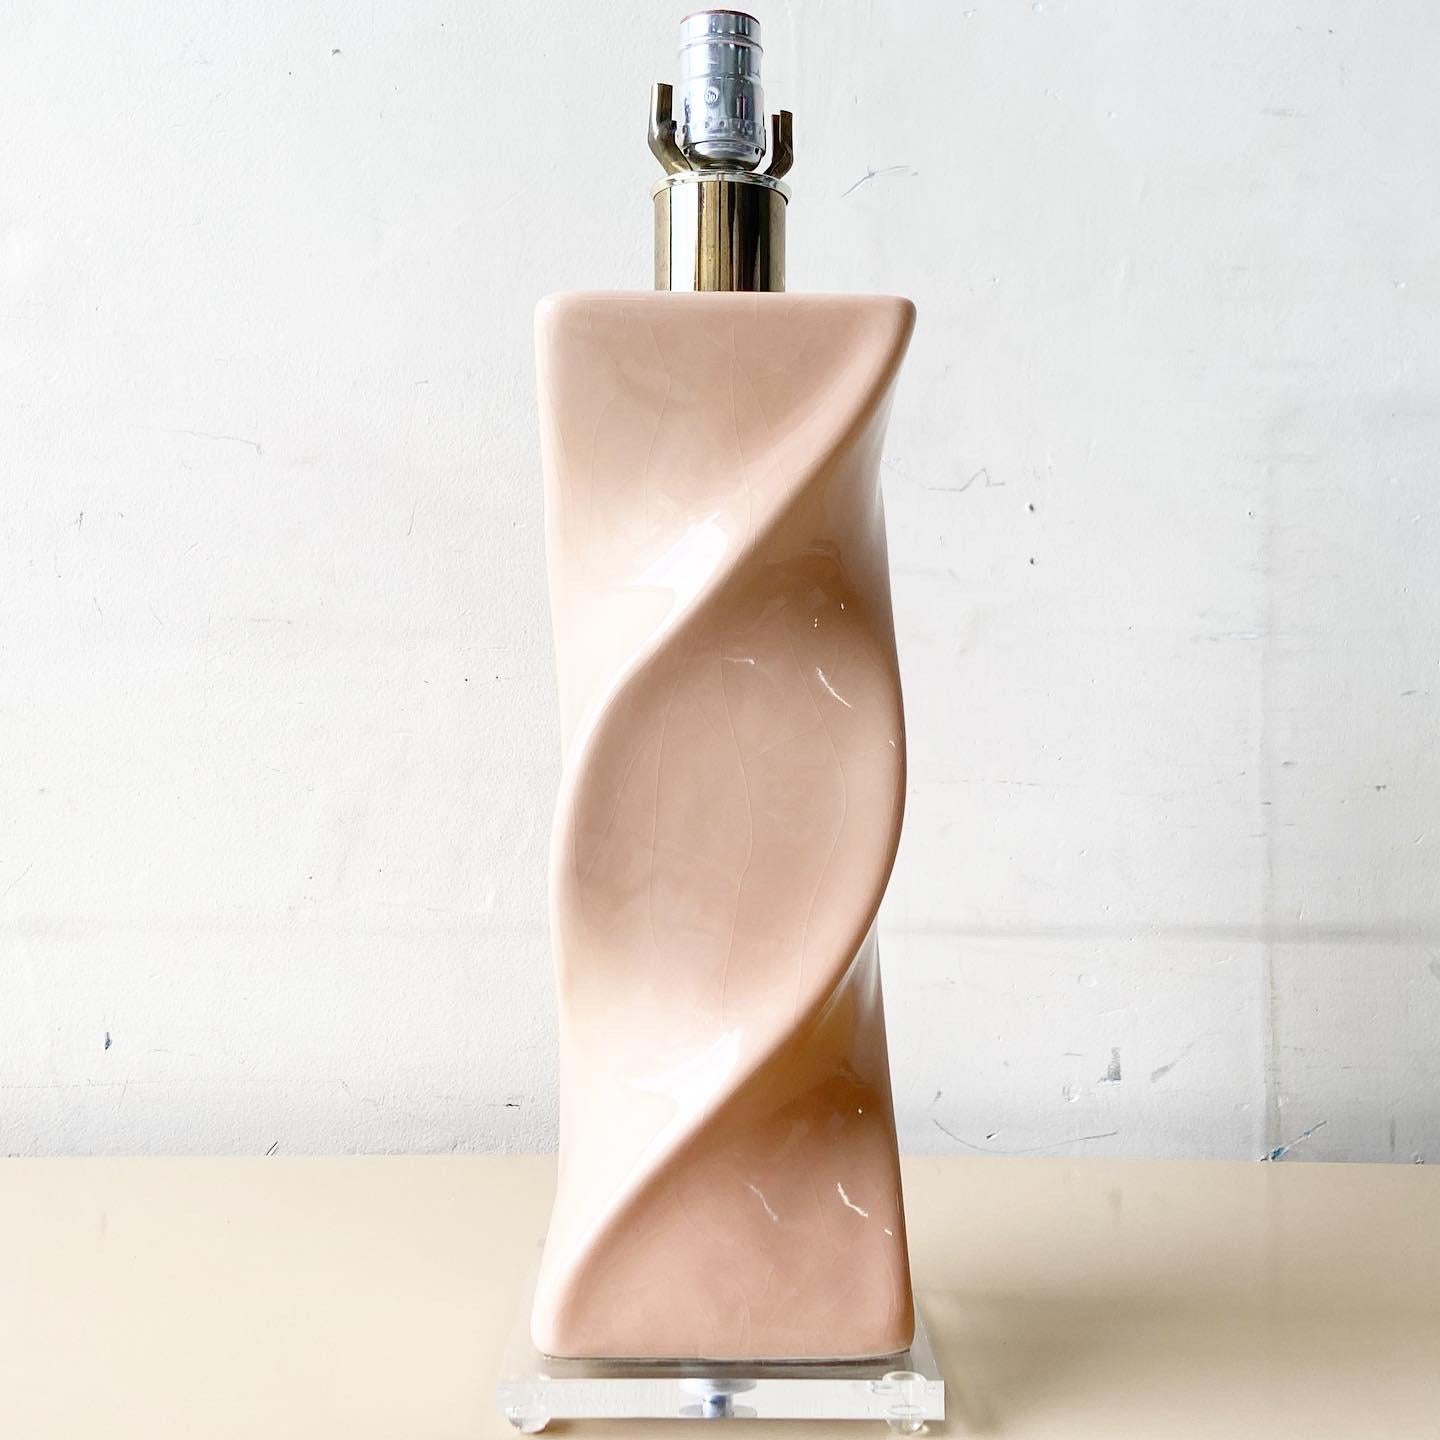 Outstanding vintage postmodern ceramic table lamp. Features a pink glass finish over the twisted rectangular body.

3 way lighting.